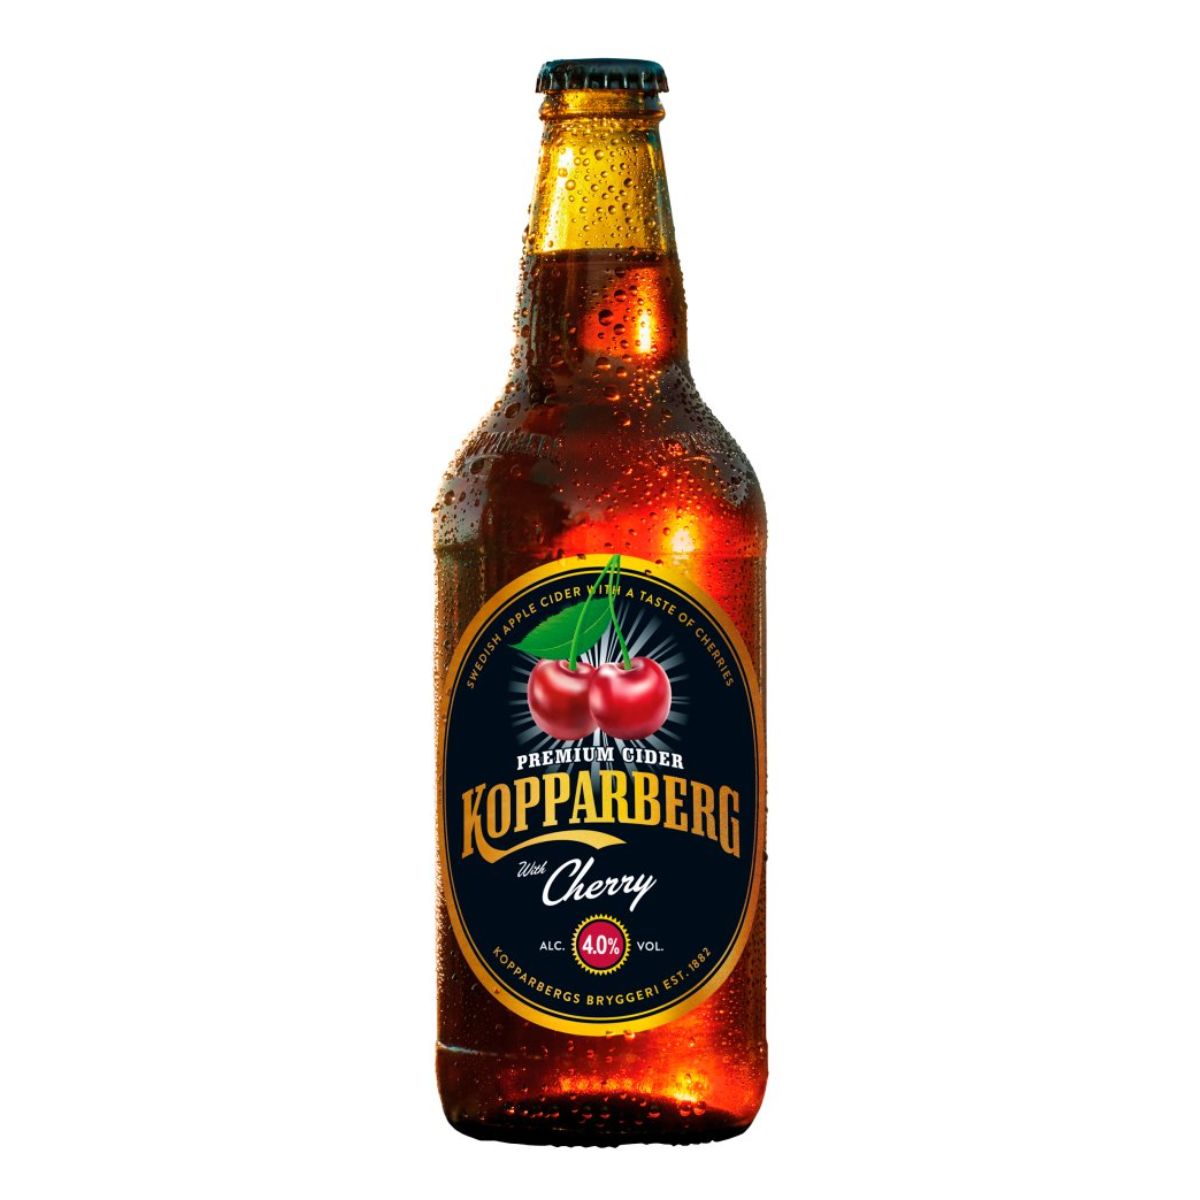 A bottle of Kopparberg - Premium Cider with Cherry (4.0% ABV) - 500ml on a white background.